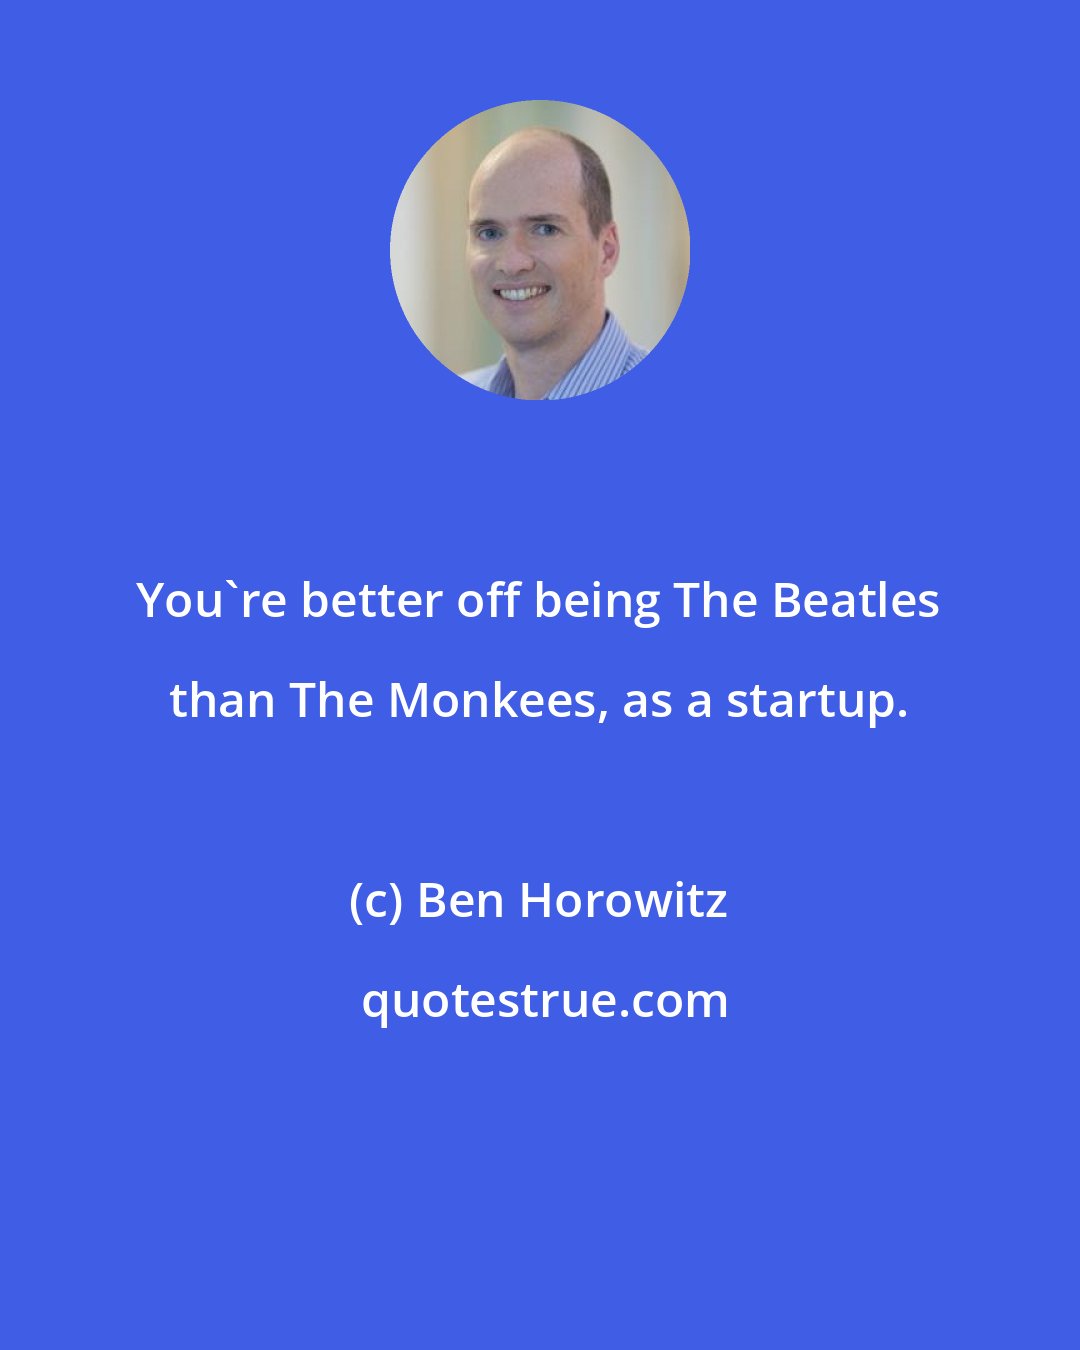 Ben Horowitz: You're better off being The Beatles than The Monkees, as a startup.